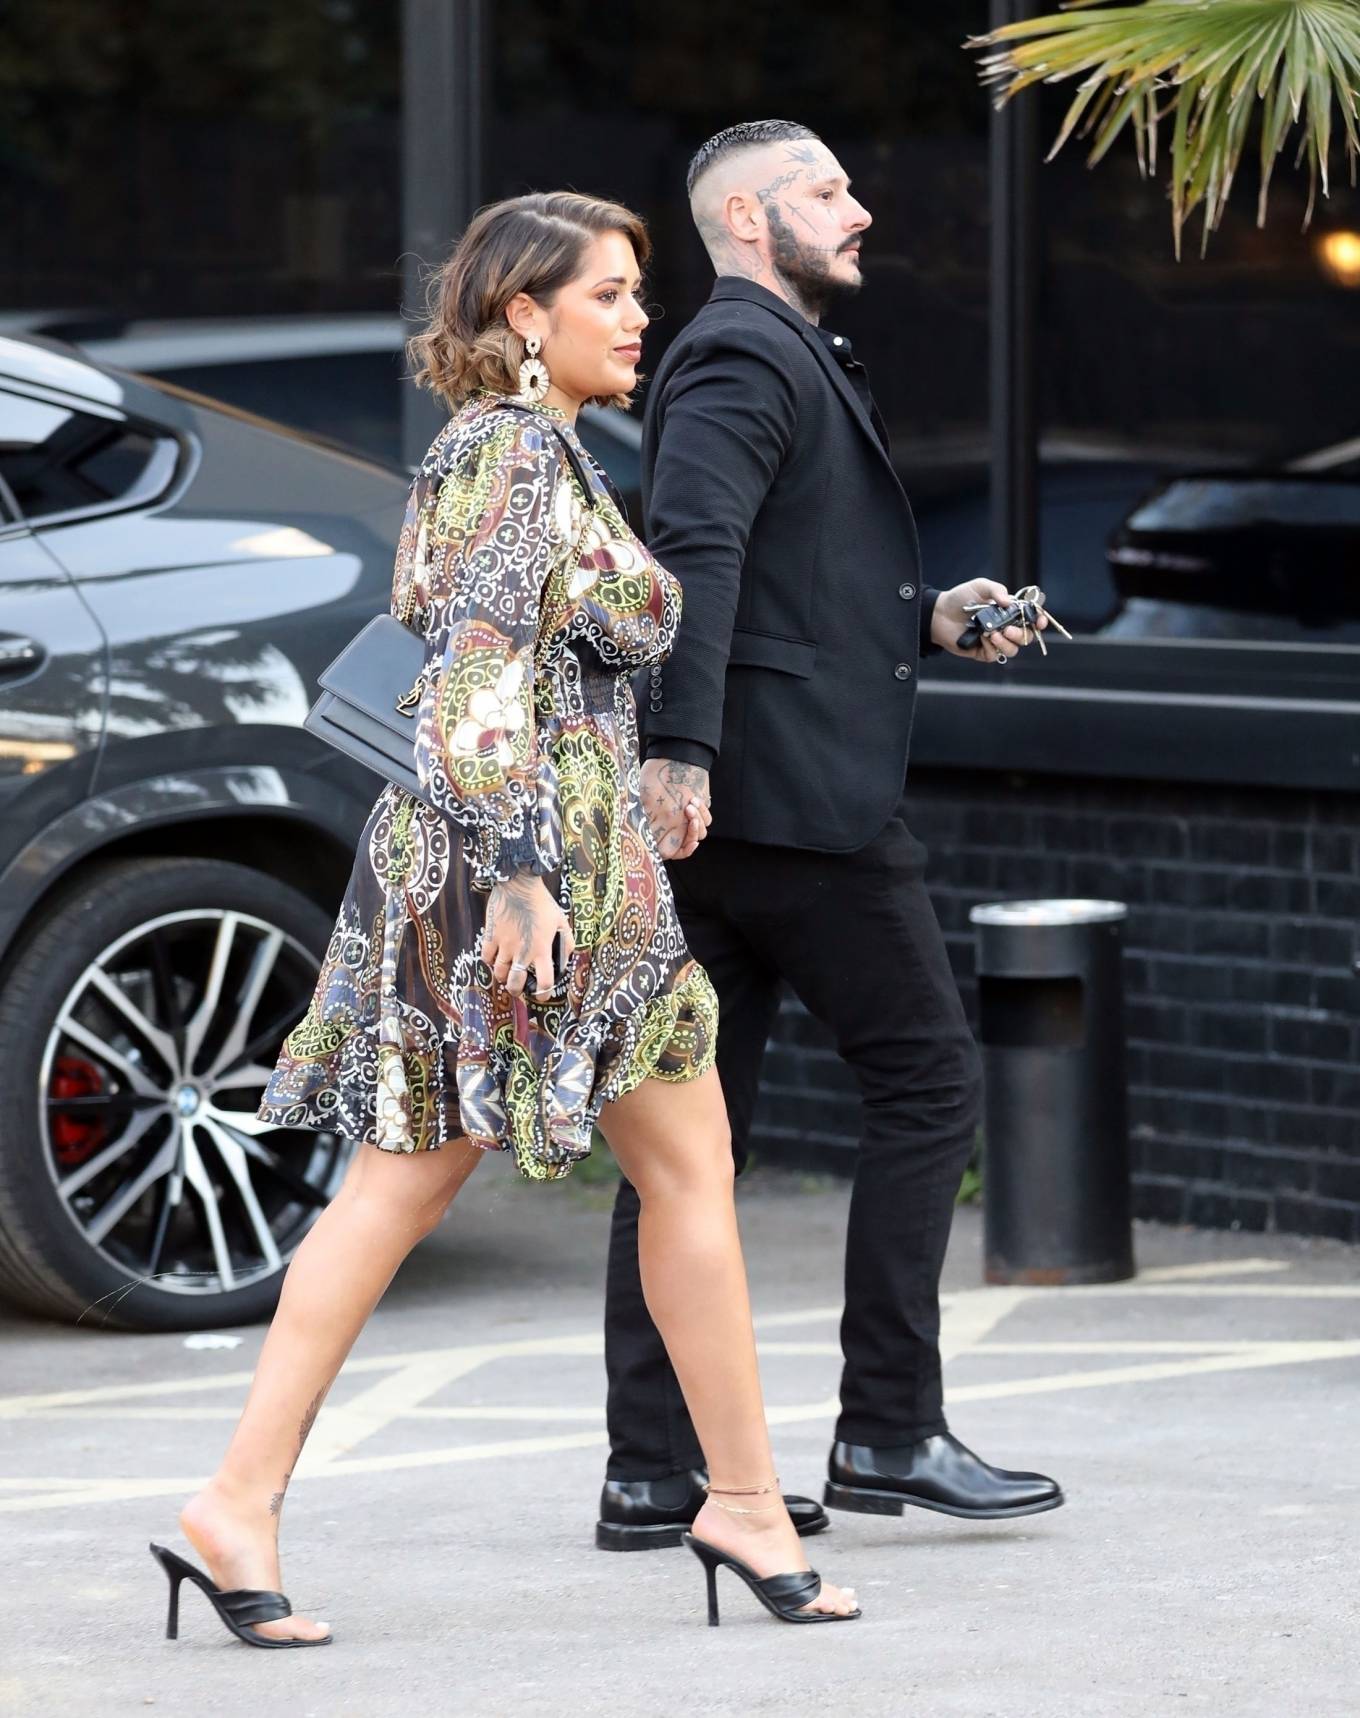 Malin Andersson 2021 : Malin Andersson – Out in her patterned floral dress in Essex-01